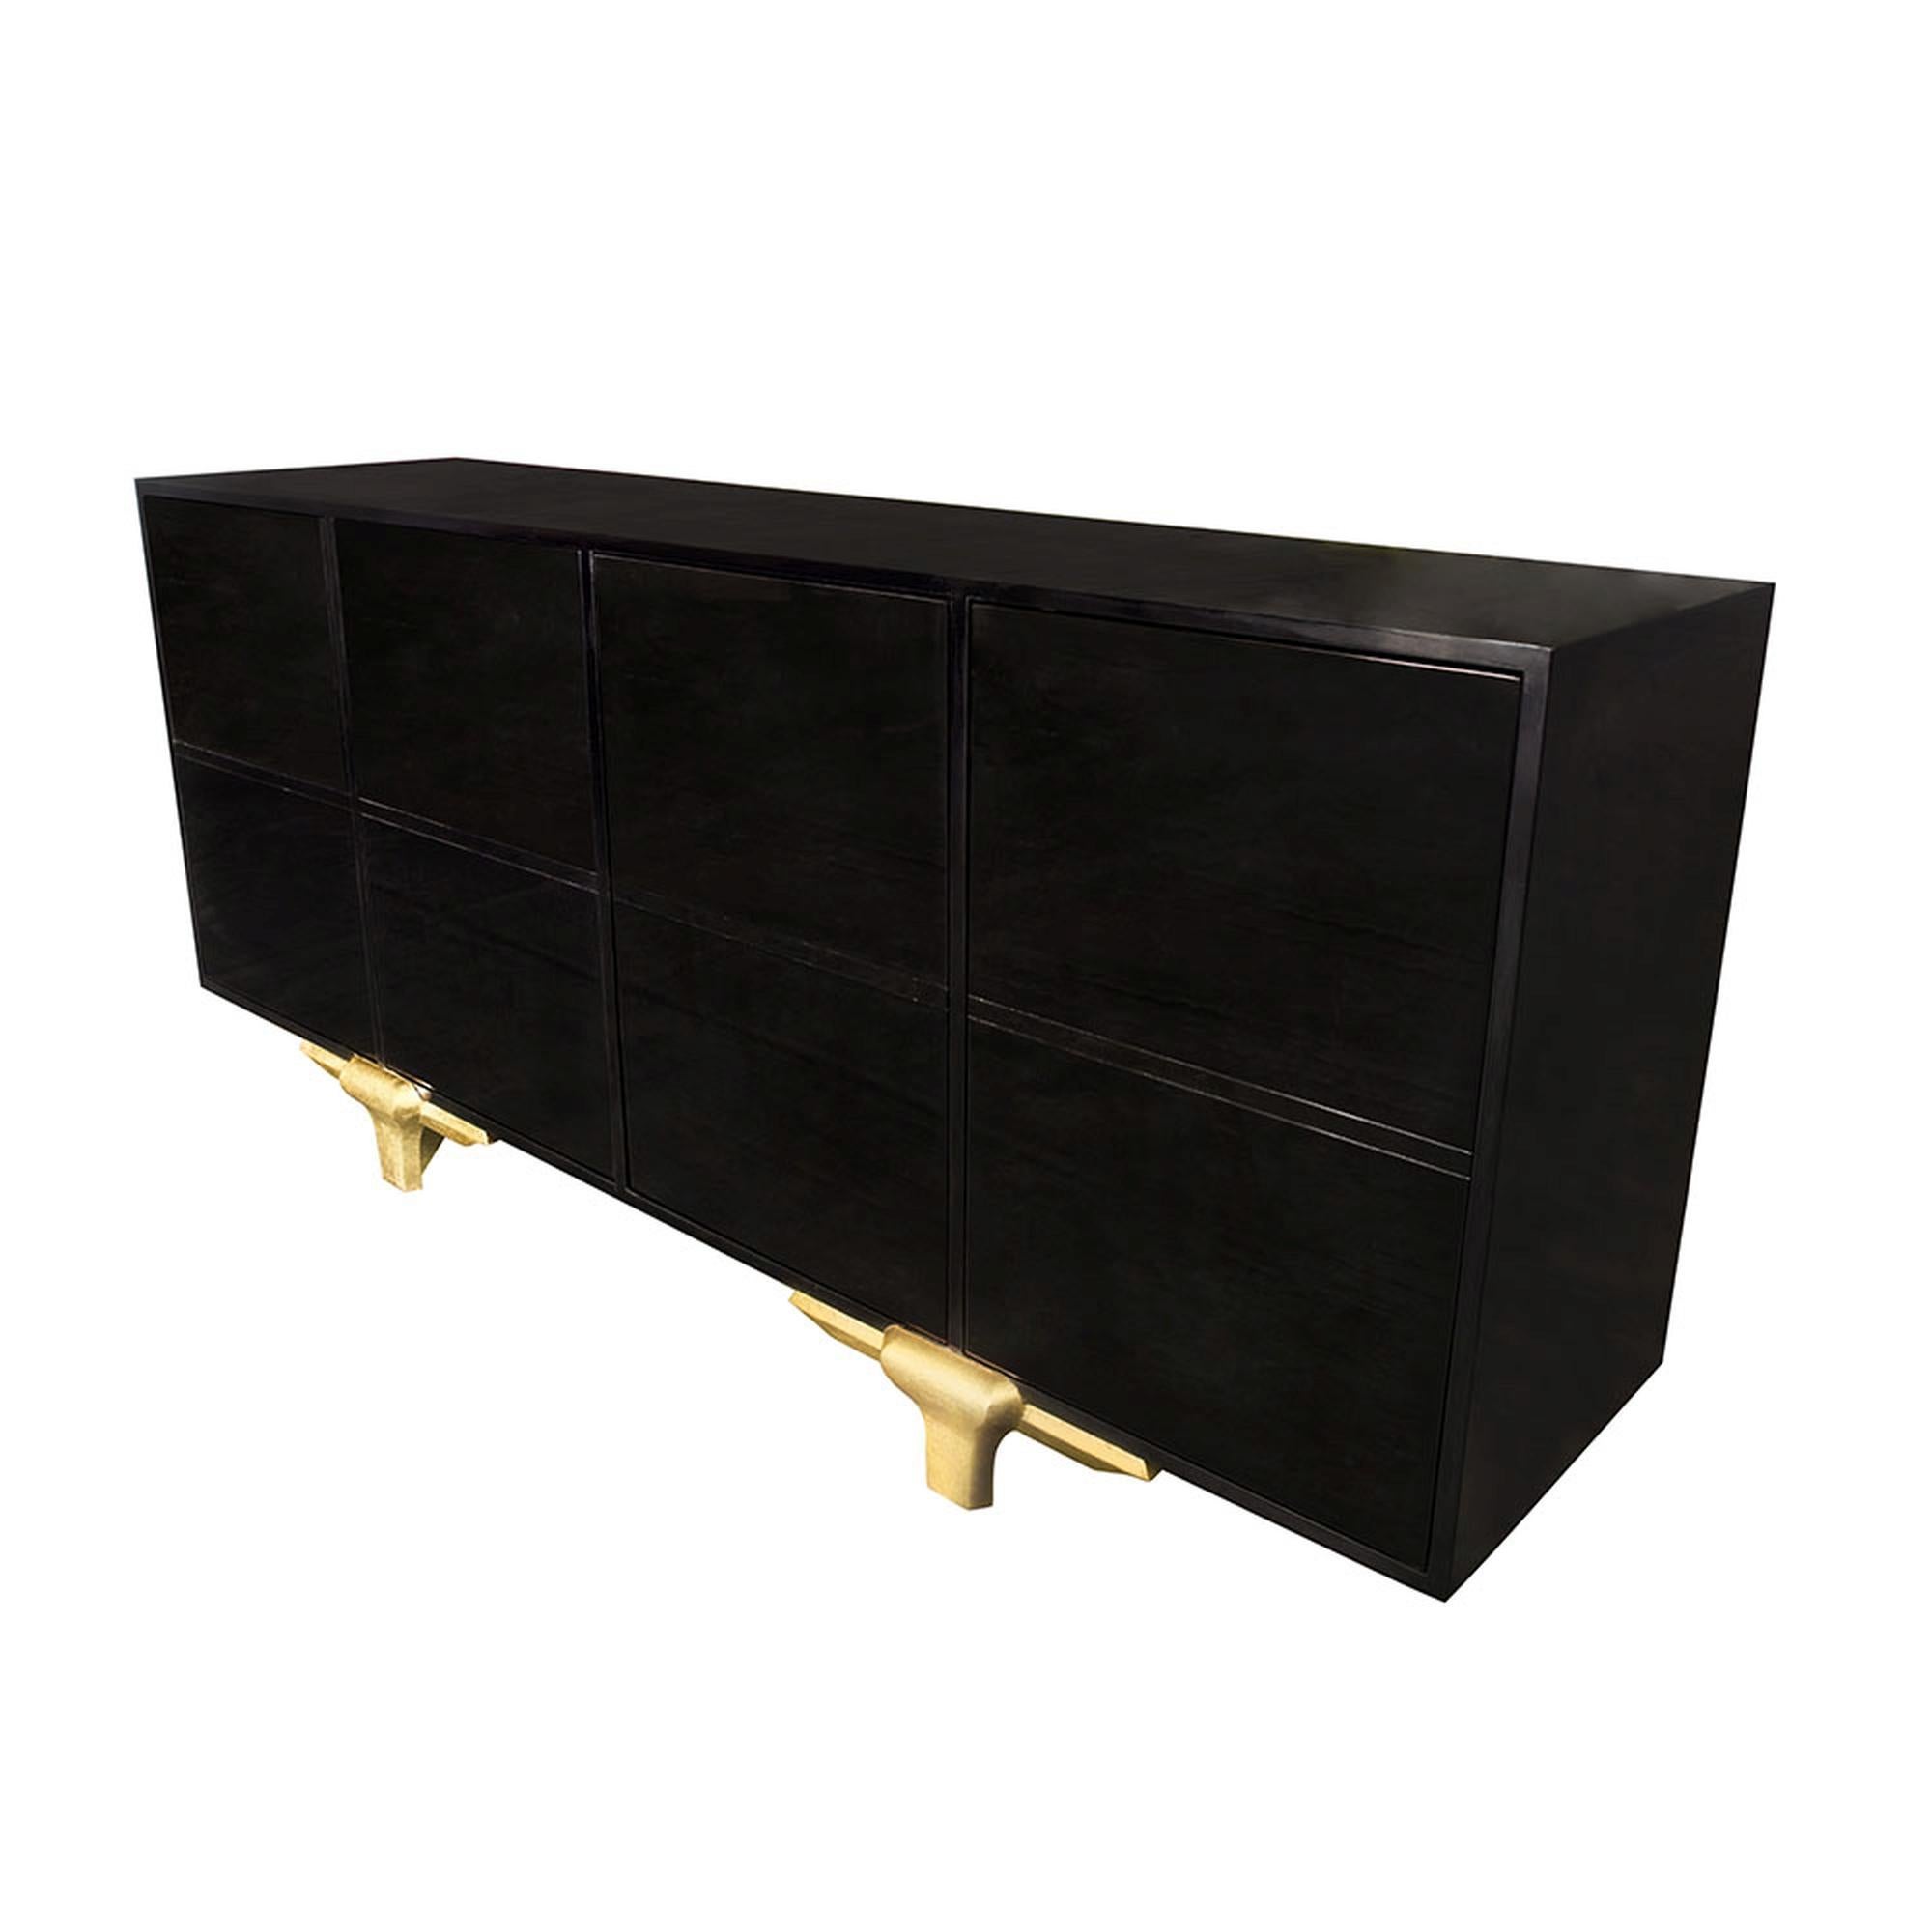 With its grand appeal, the Marmont buffet is a stunning, sophisticated piece. Its incredibly clean design makes the lacquered ebony wood look as if it is merely oating on the hand carved gold leaf legs. Every inch of this sleek design has been